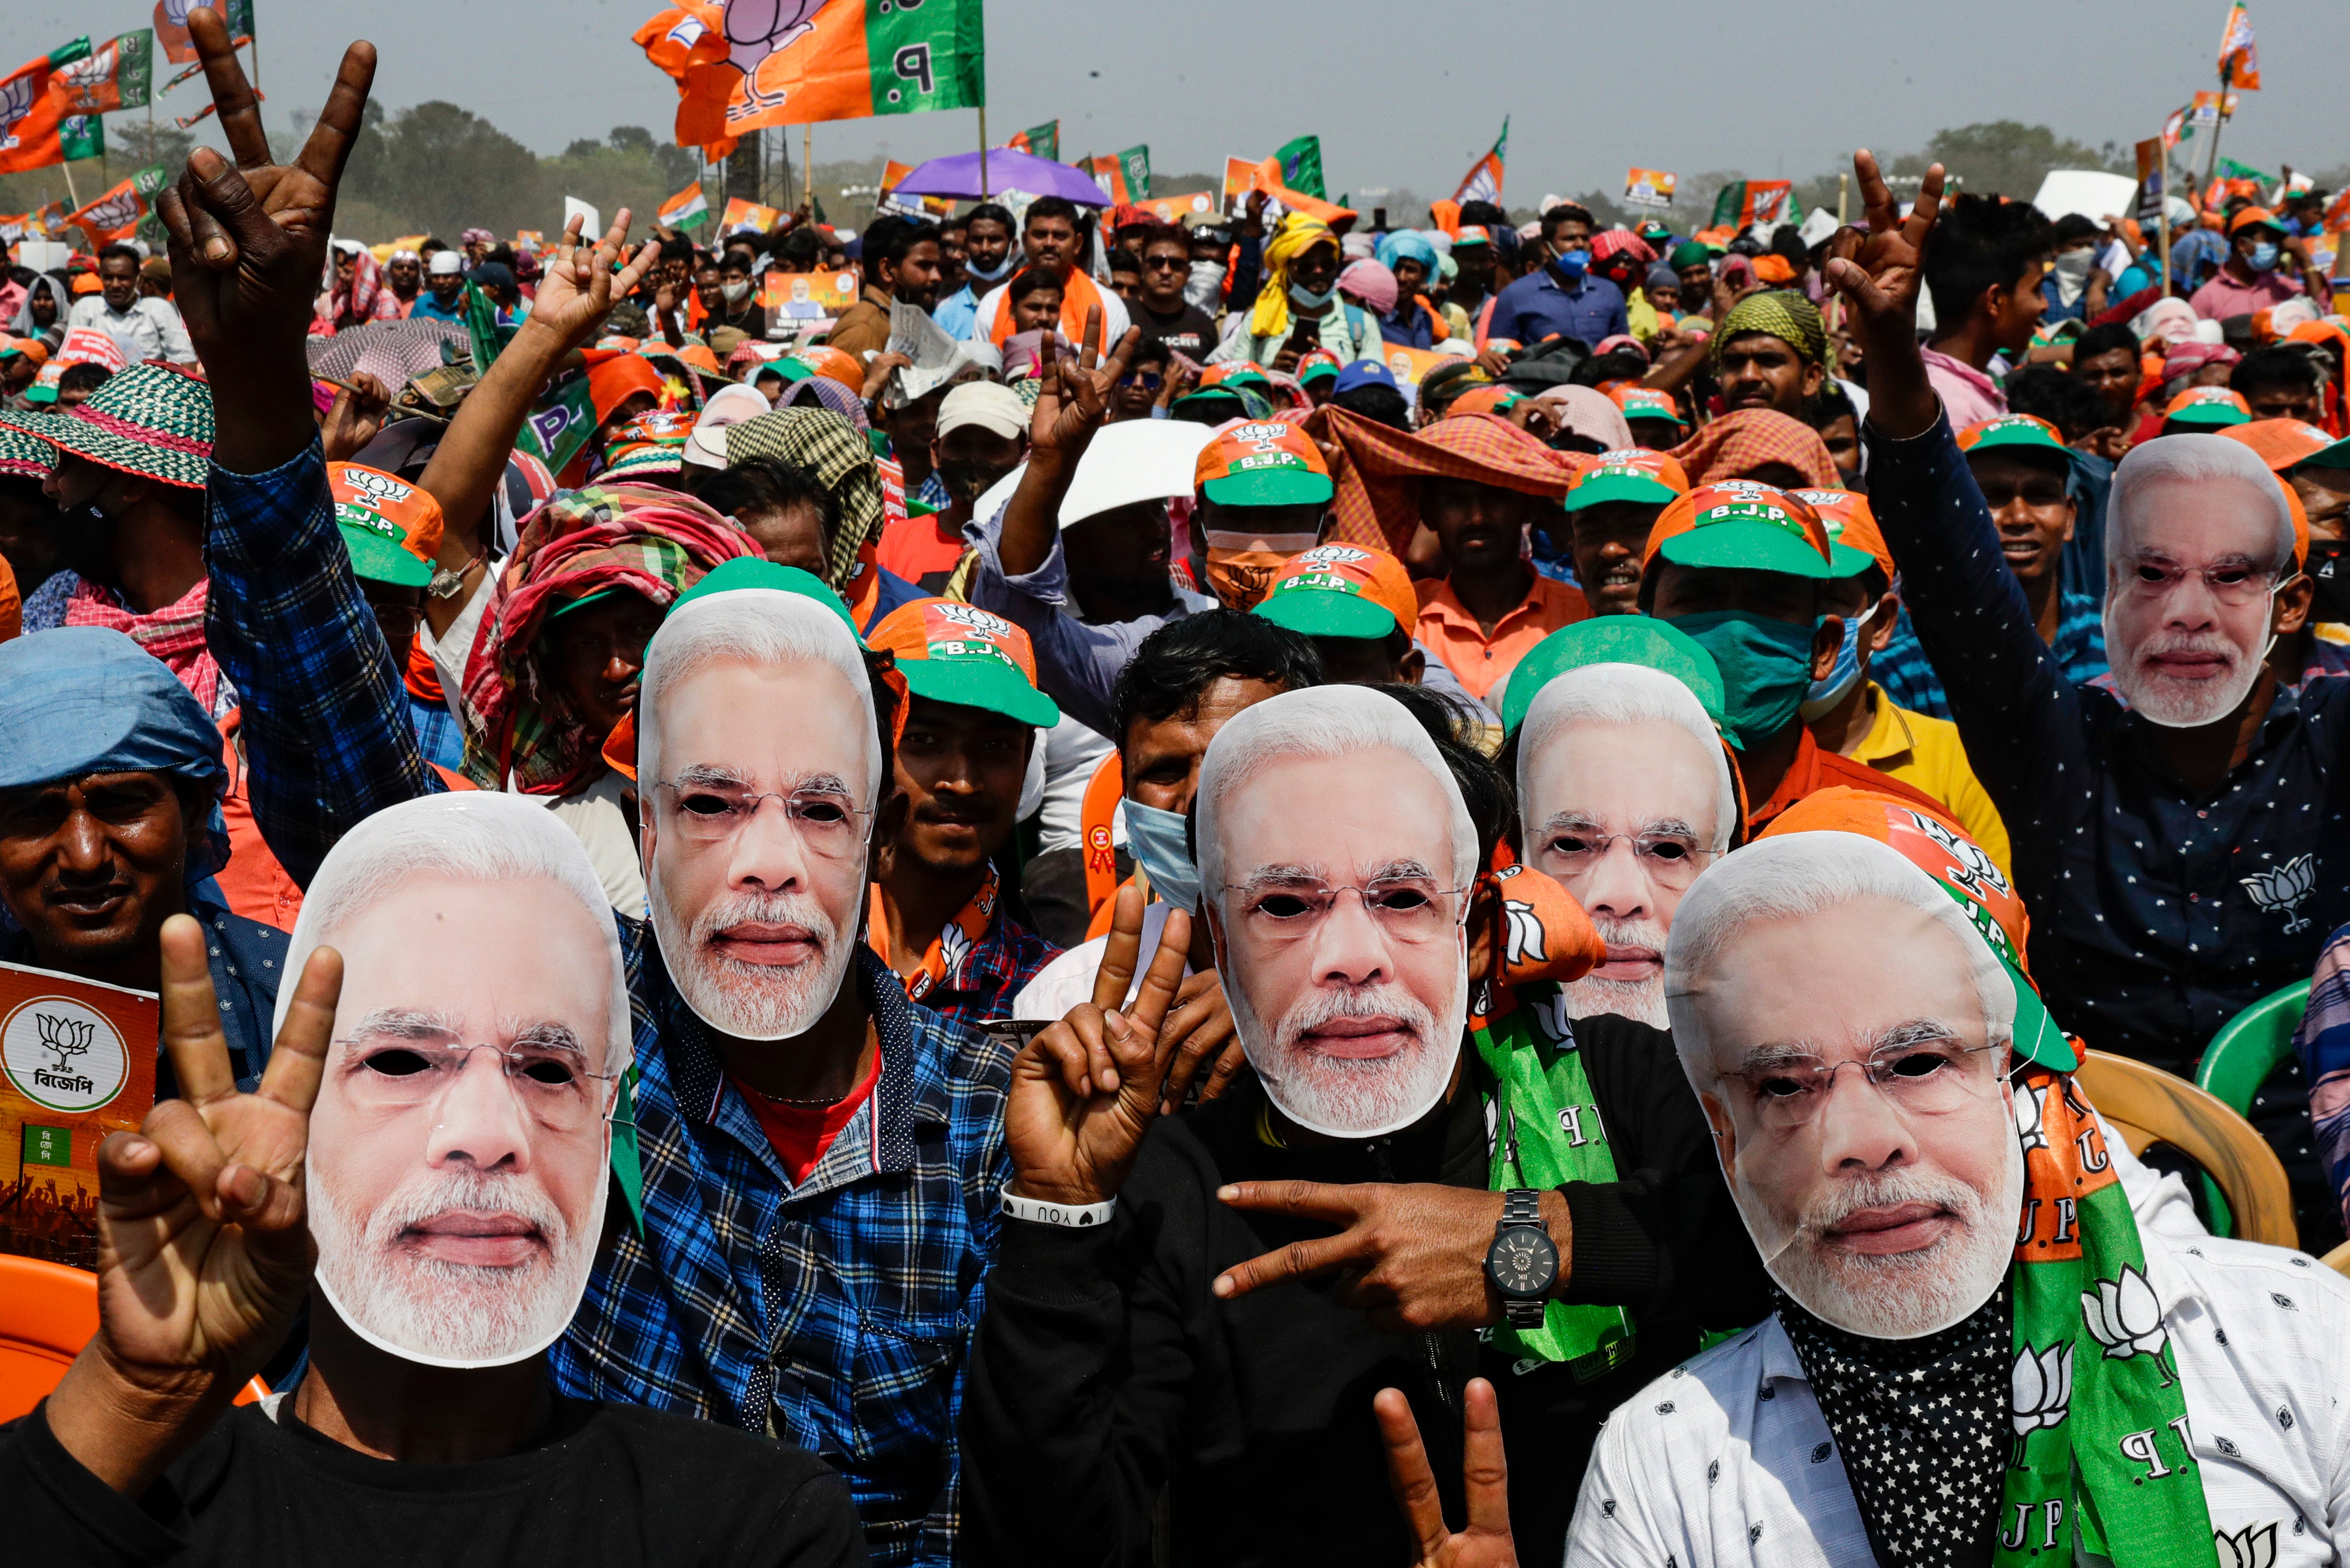 File image: Five Indian states will vote in a closely watched electoral battle over the next few weeks